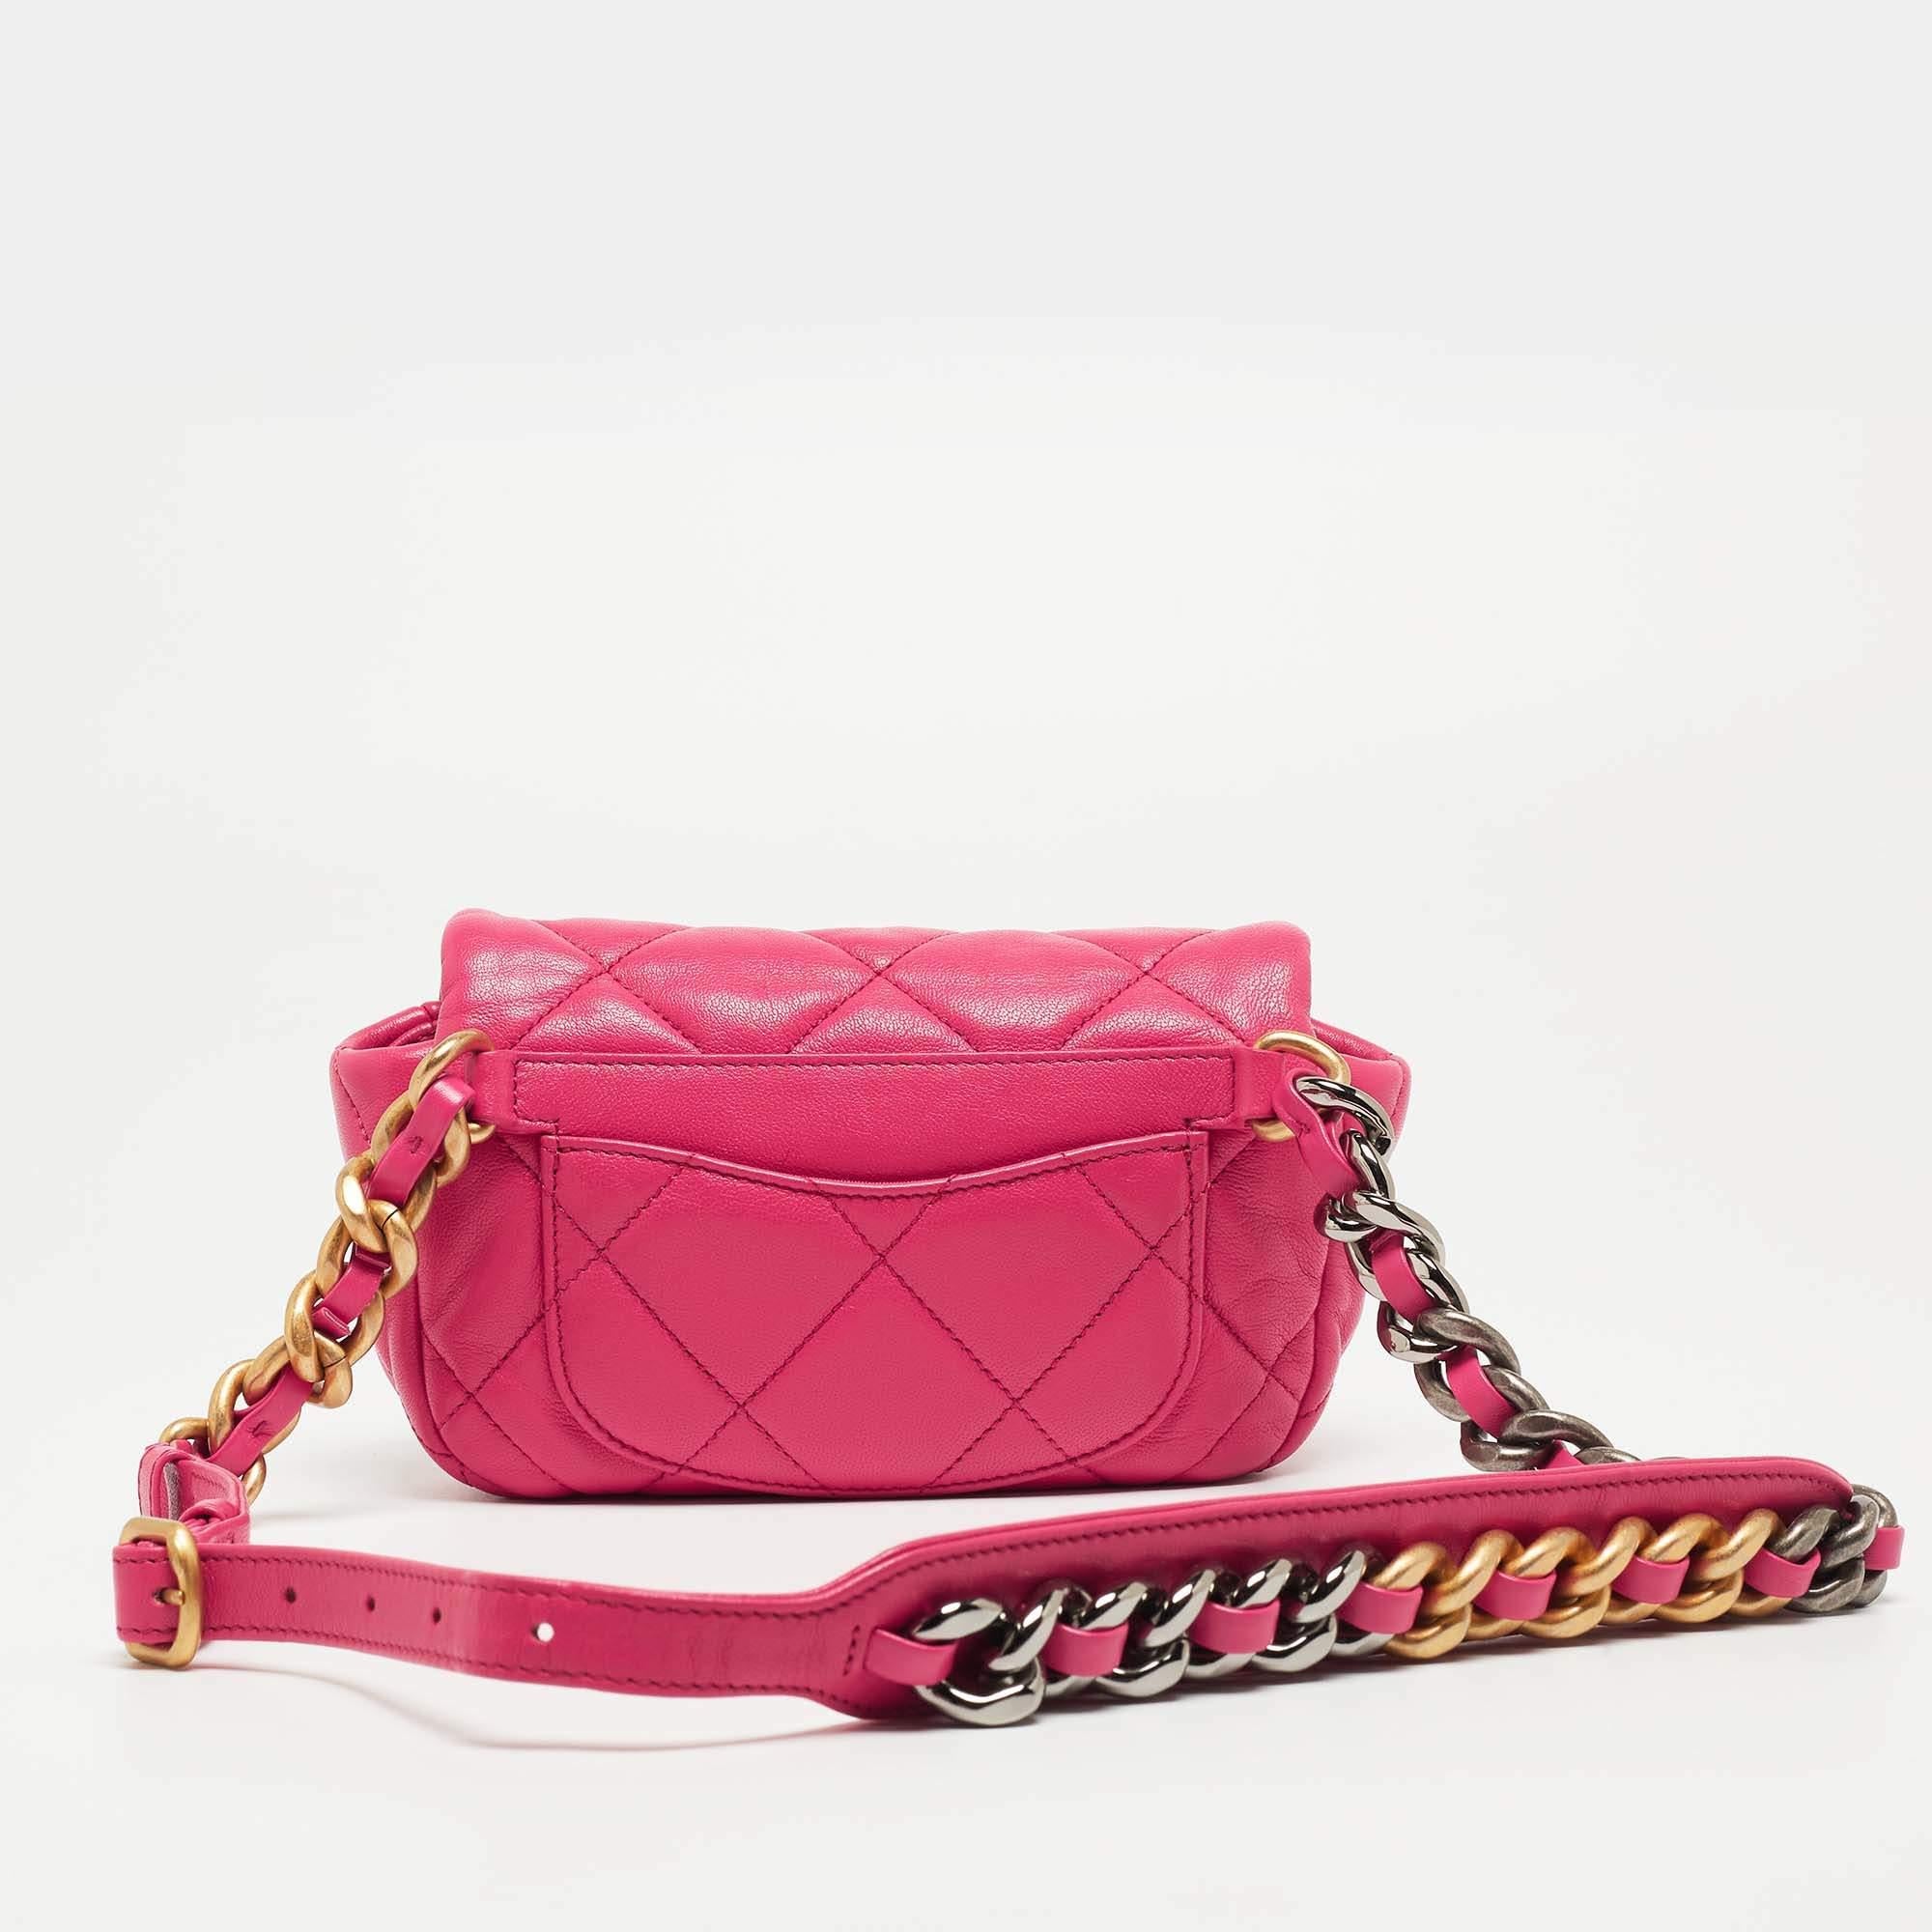 Women's Chanel Pink Quilted Leather CC 19 Waist Bag